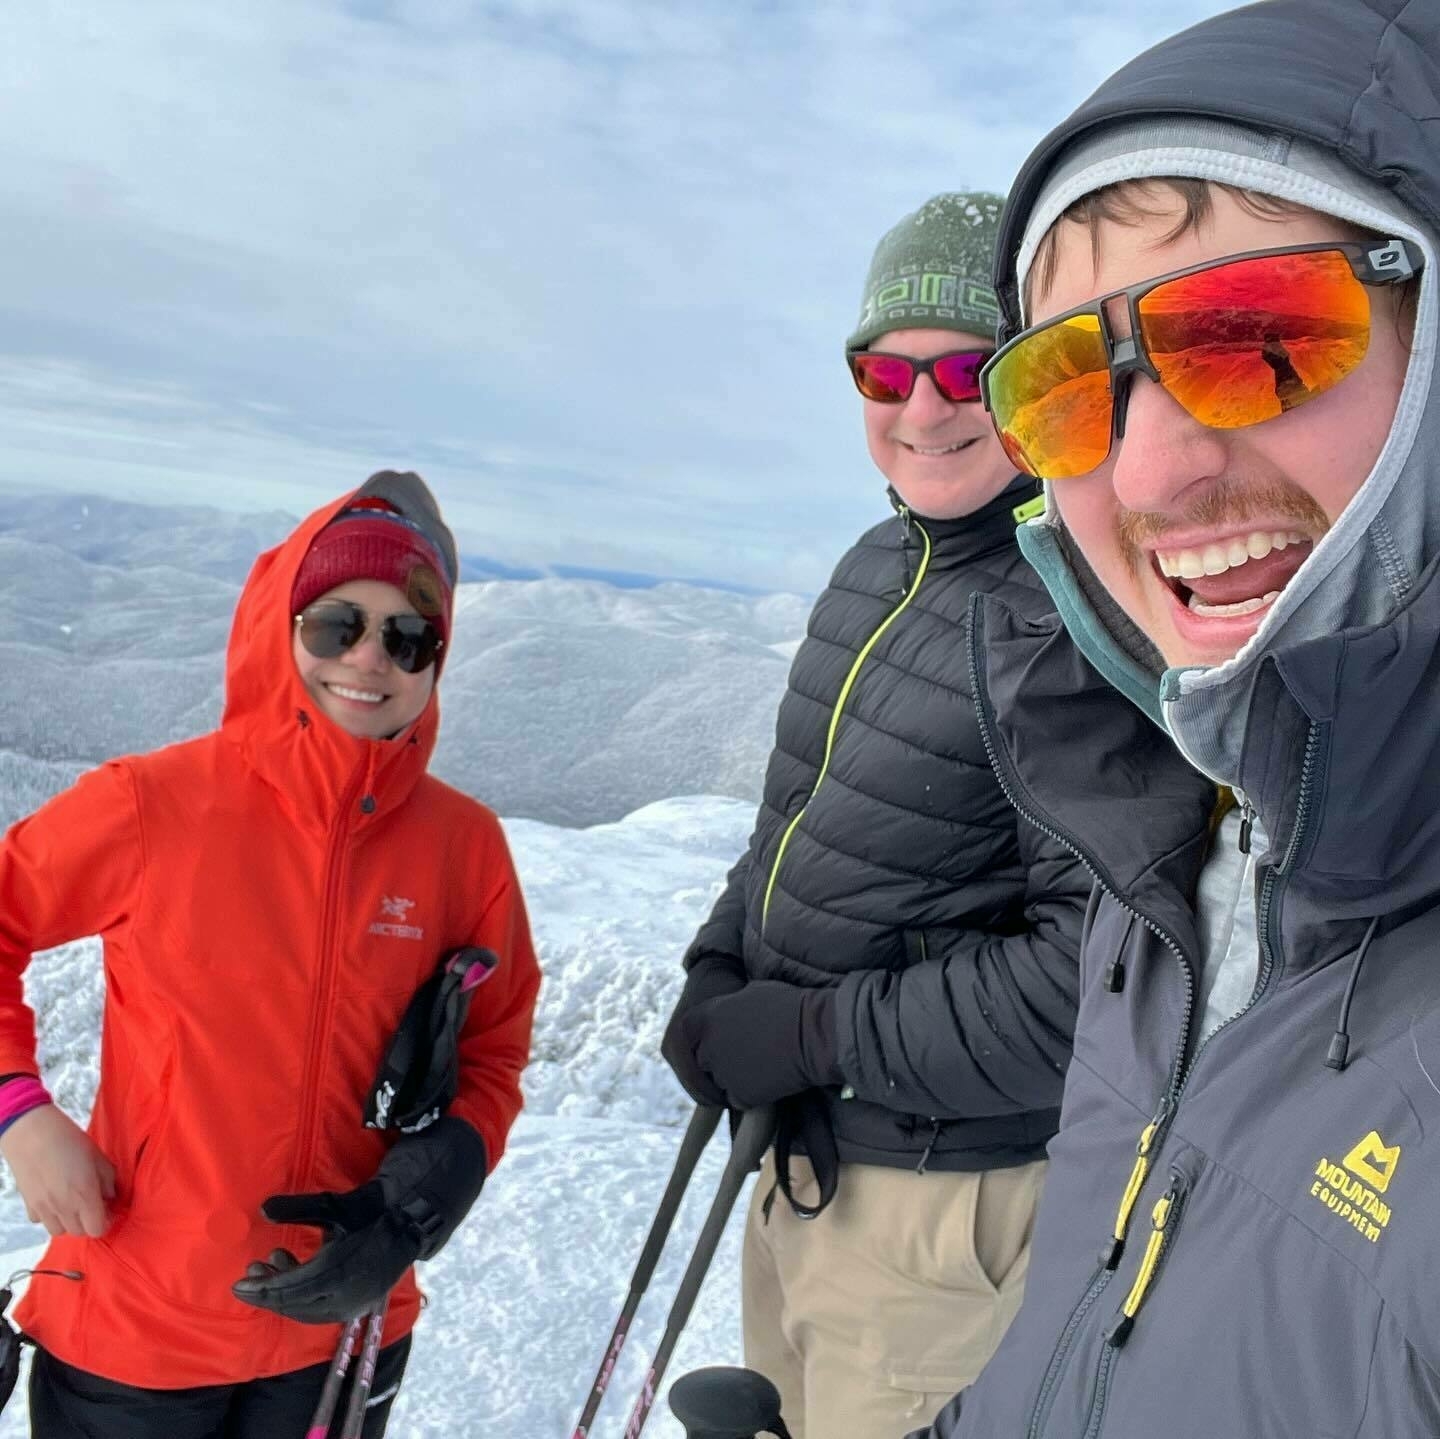 Three individuals standing atop a snowy mountain, smiling for a selfie, surrounded by a snow-covered landscape under a cloudy sky.